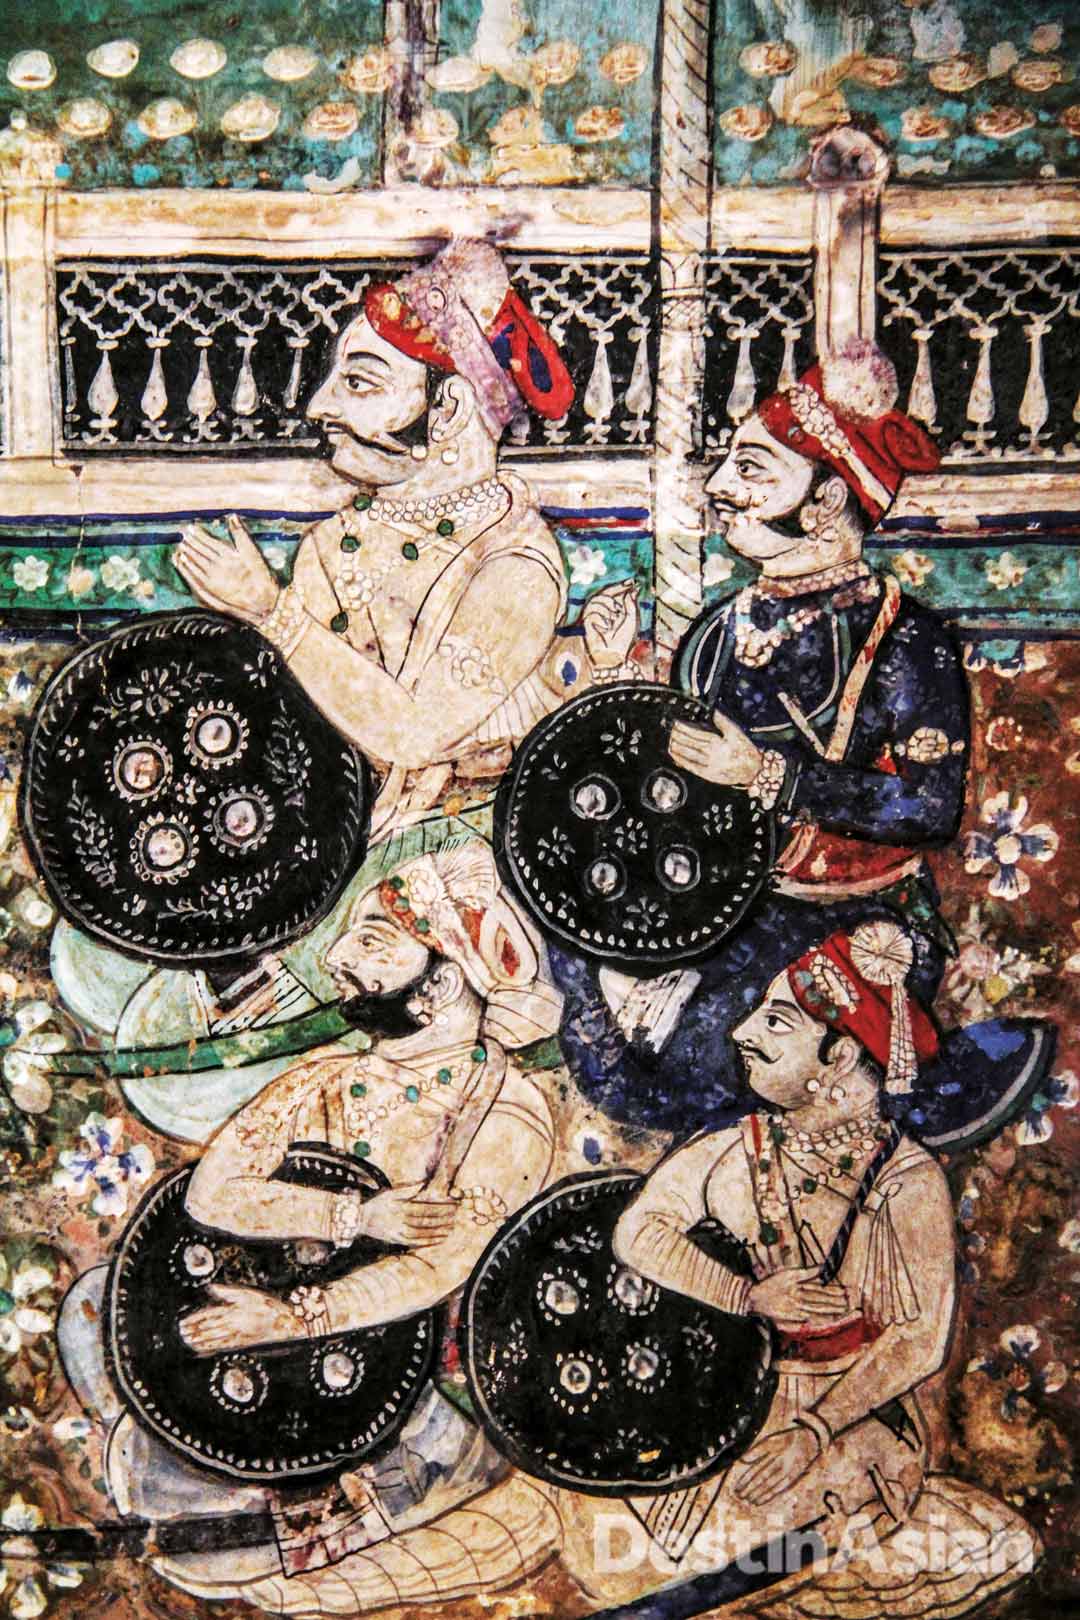 A mural detail in the Chitrashala depicting Rajput warriors during an audience with their raja.